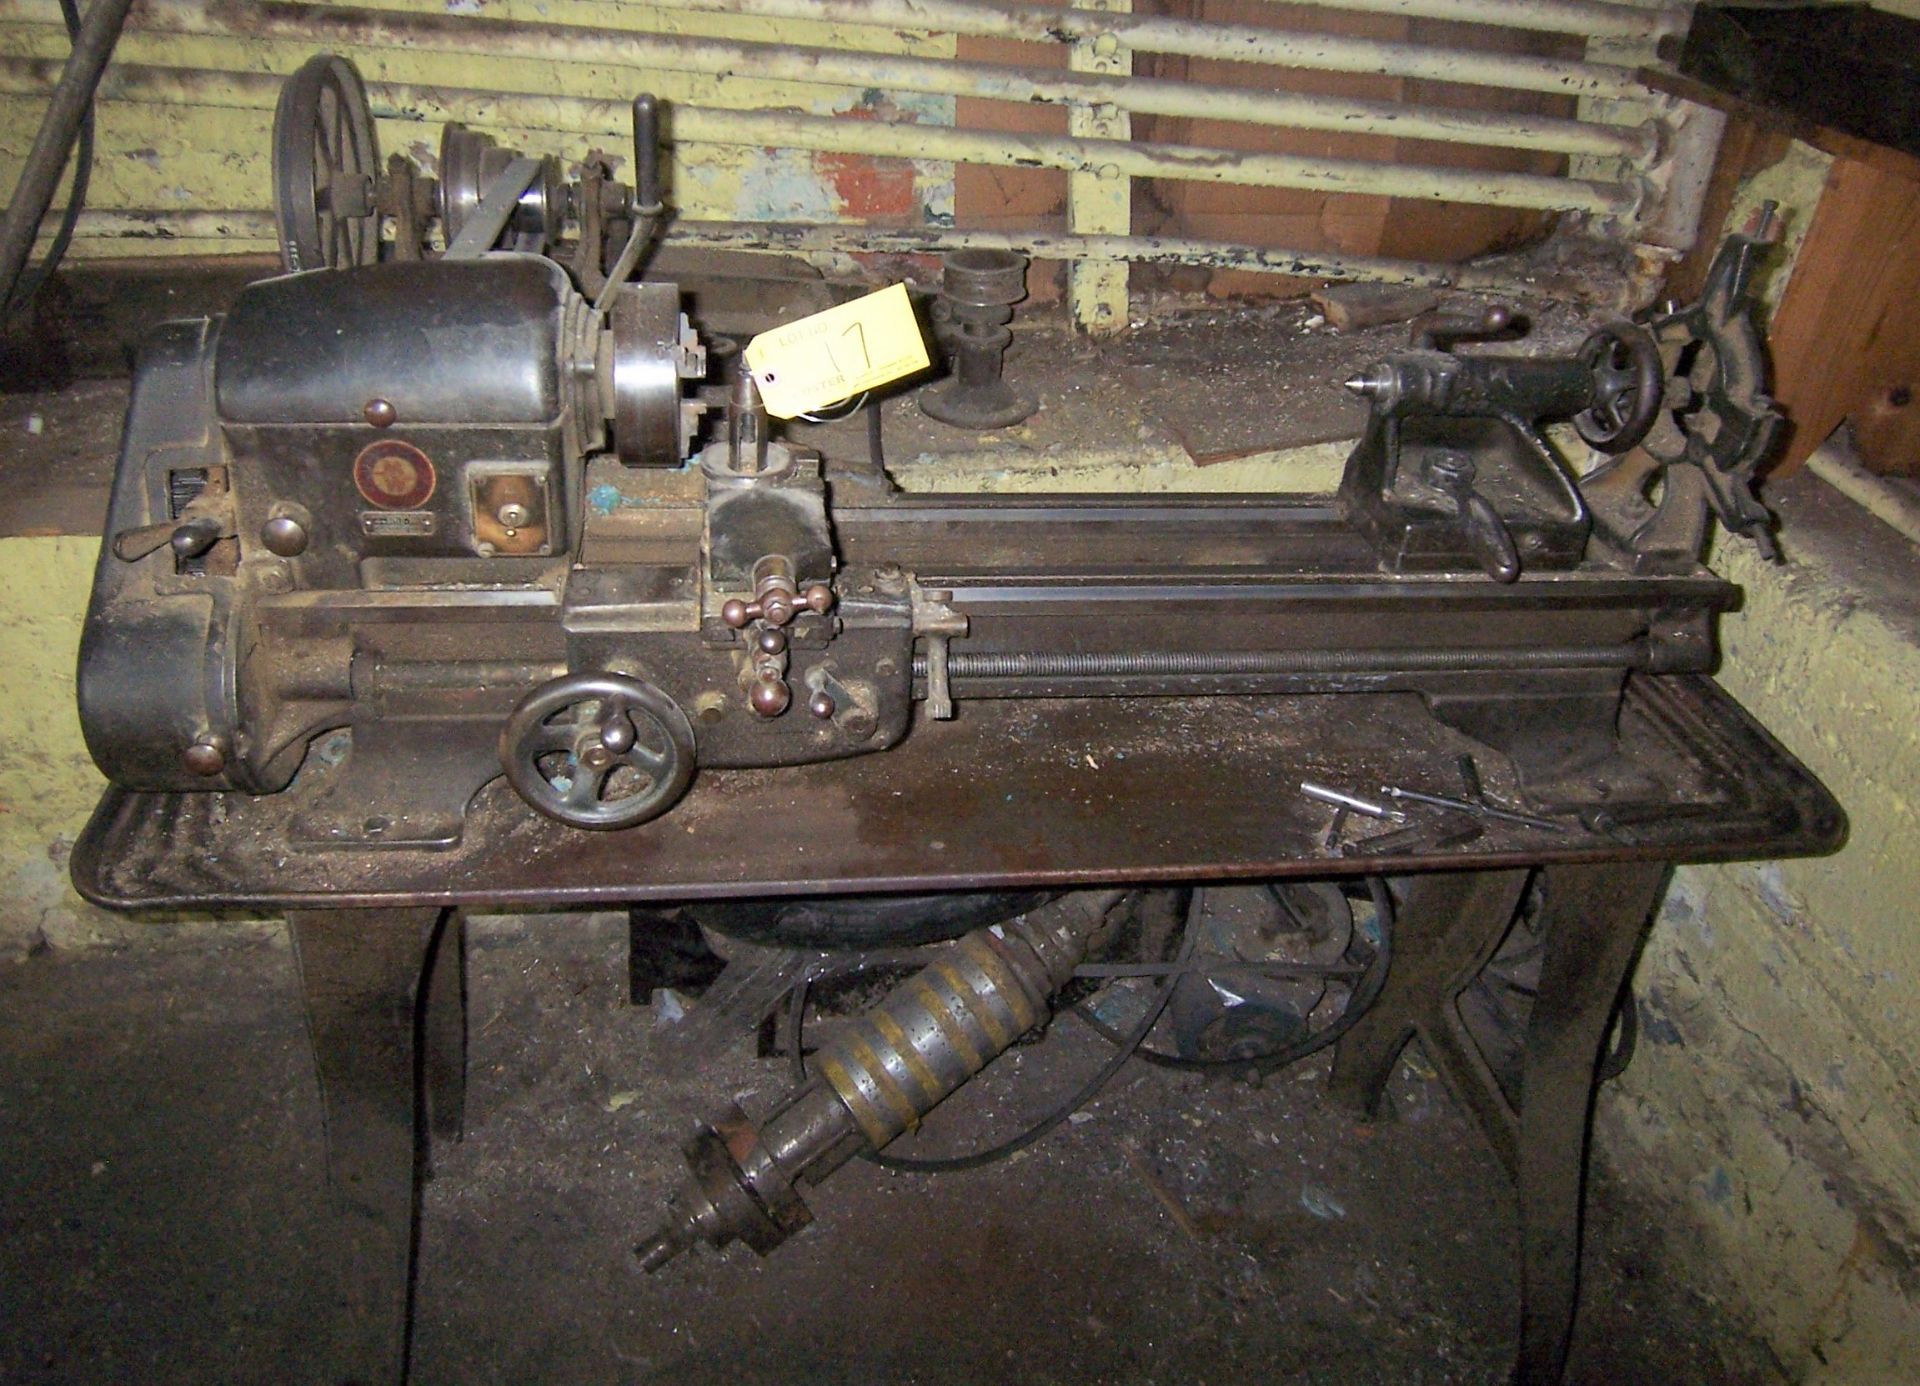 MONTGOMERY WARD MDL. 04TCC-70VA 10" X 30" LATHE WITH STEADY REST, AND 3-JAW CHUCK